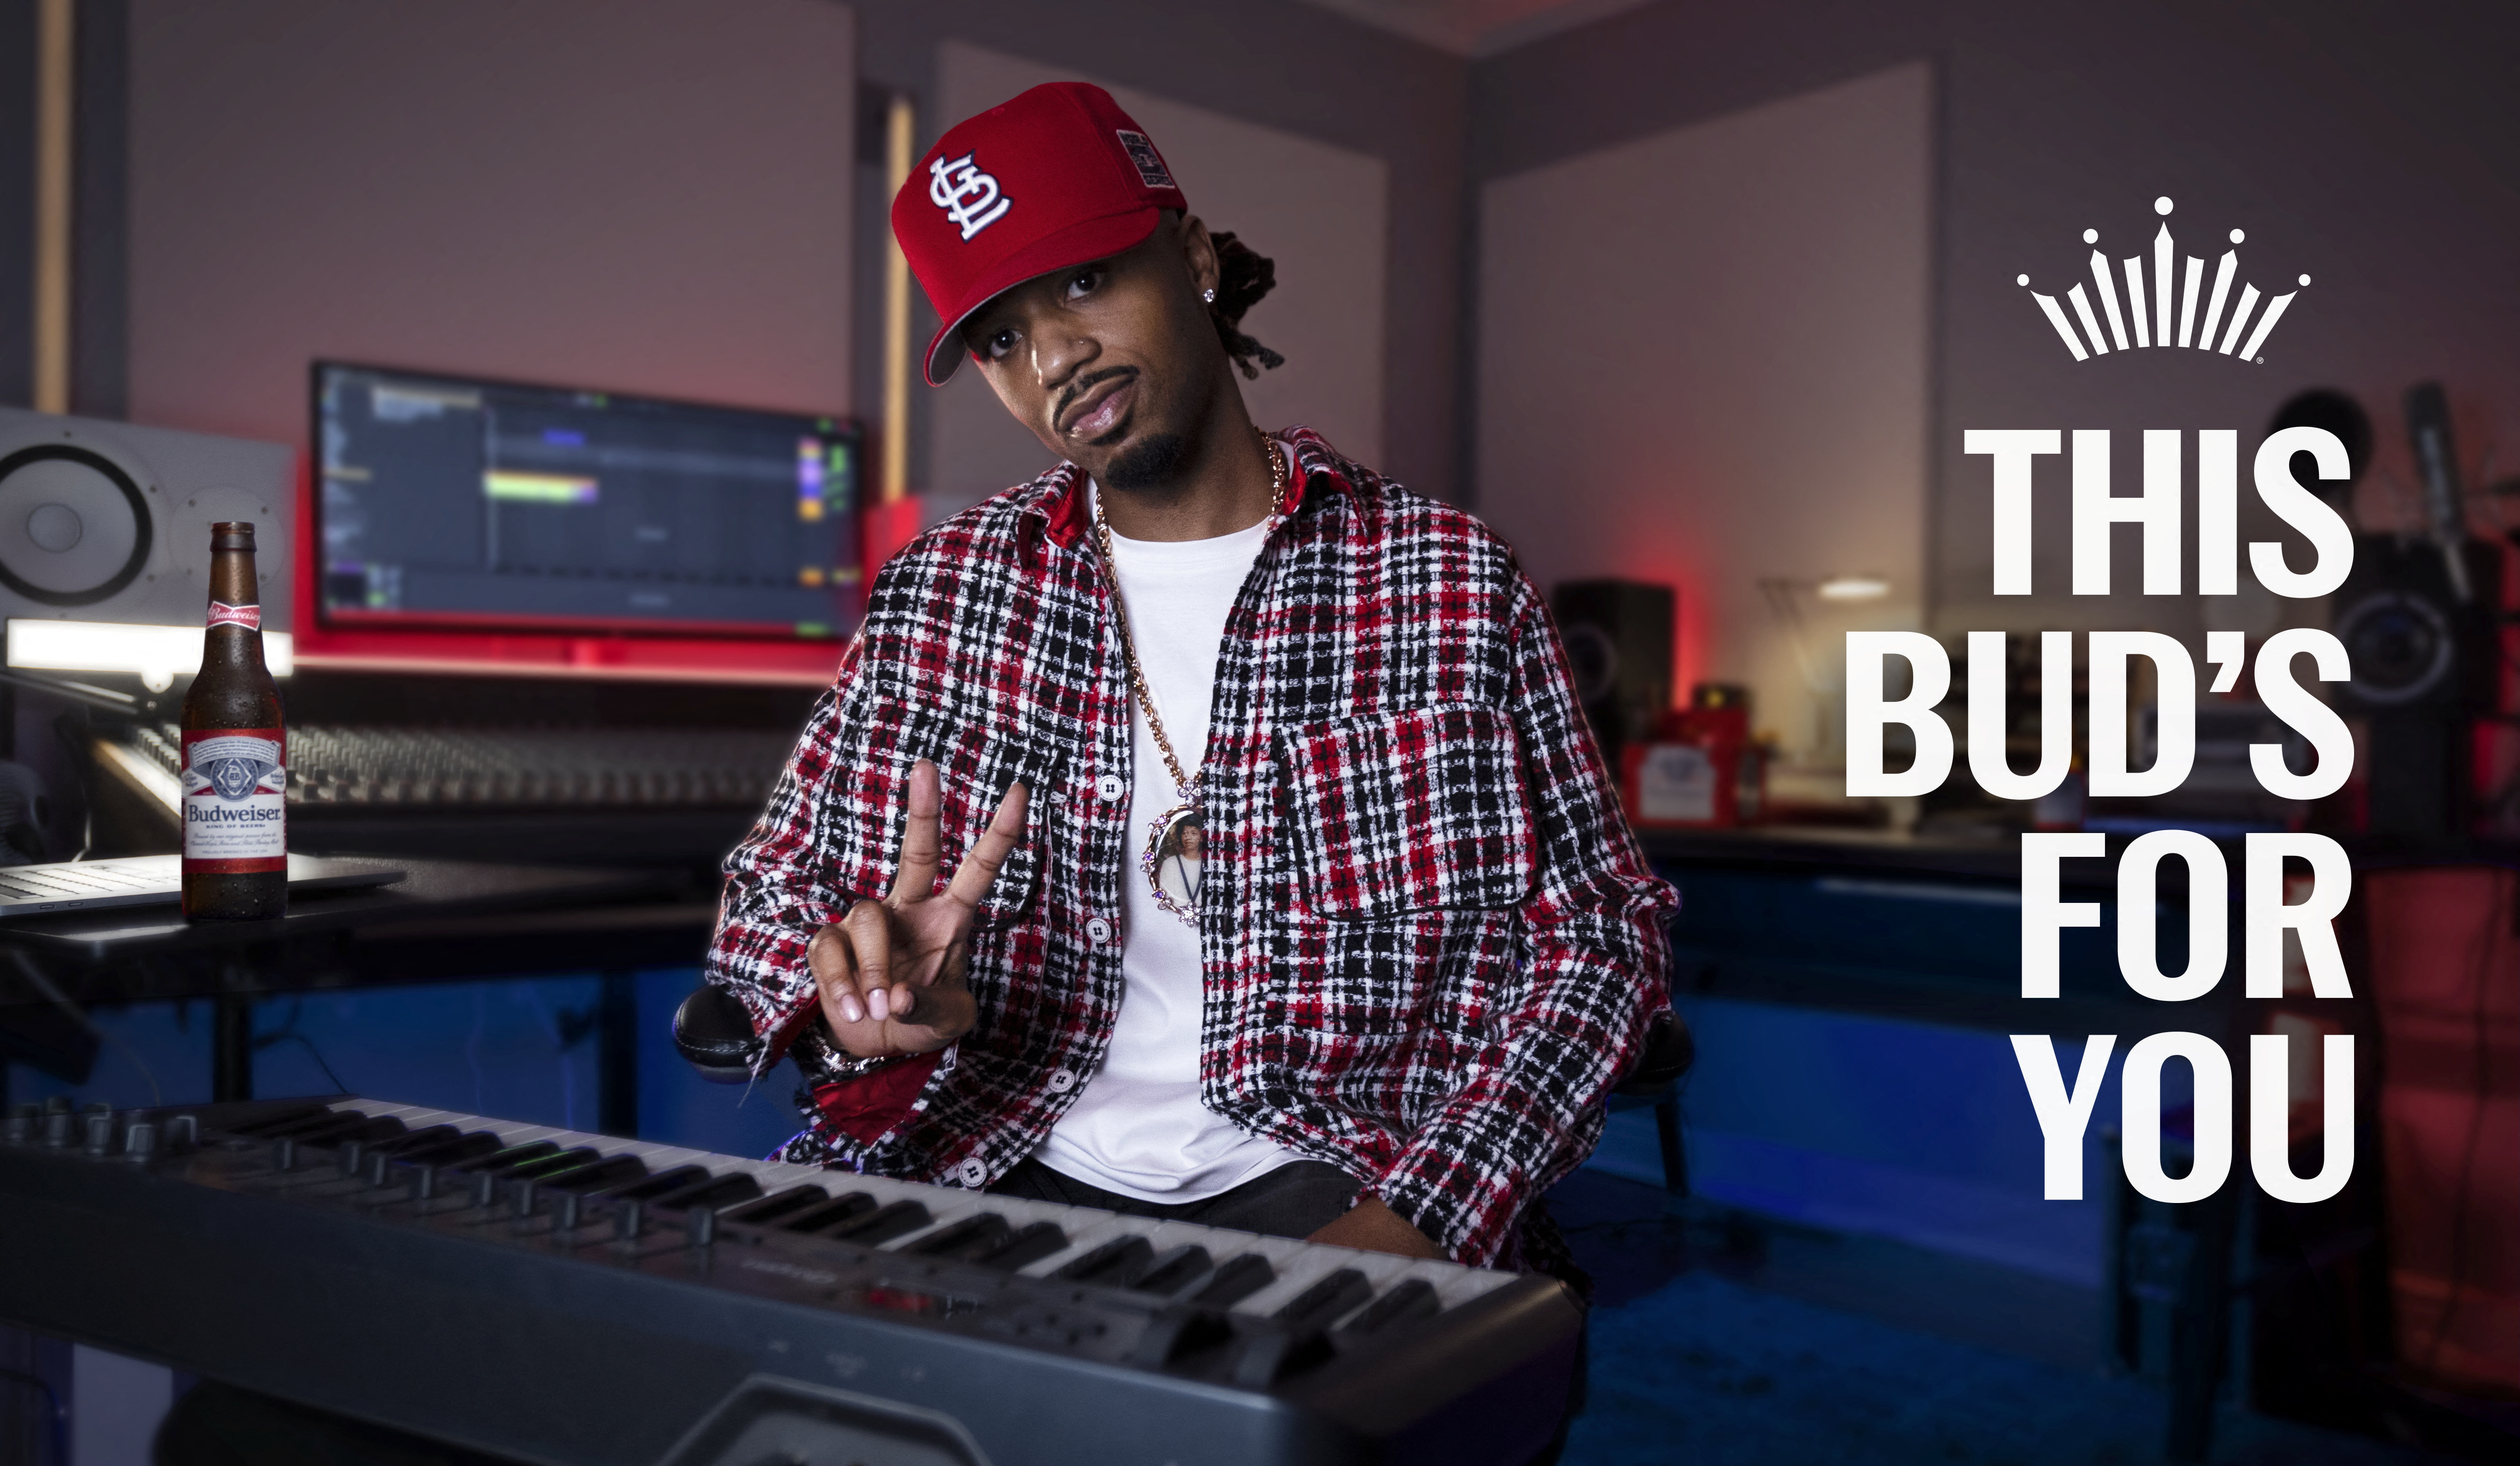 Hip hop record producer Metro Boomin participates in an ad for Budweiser